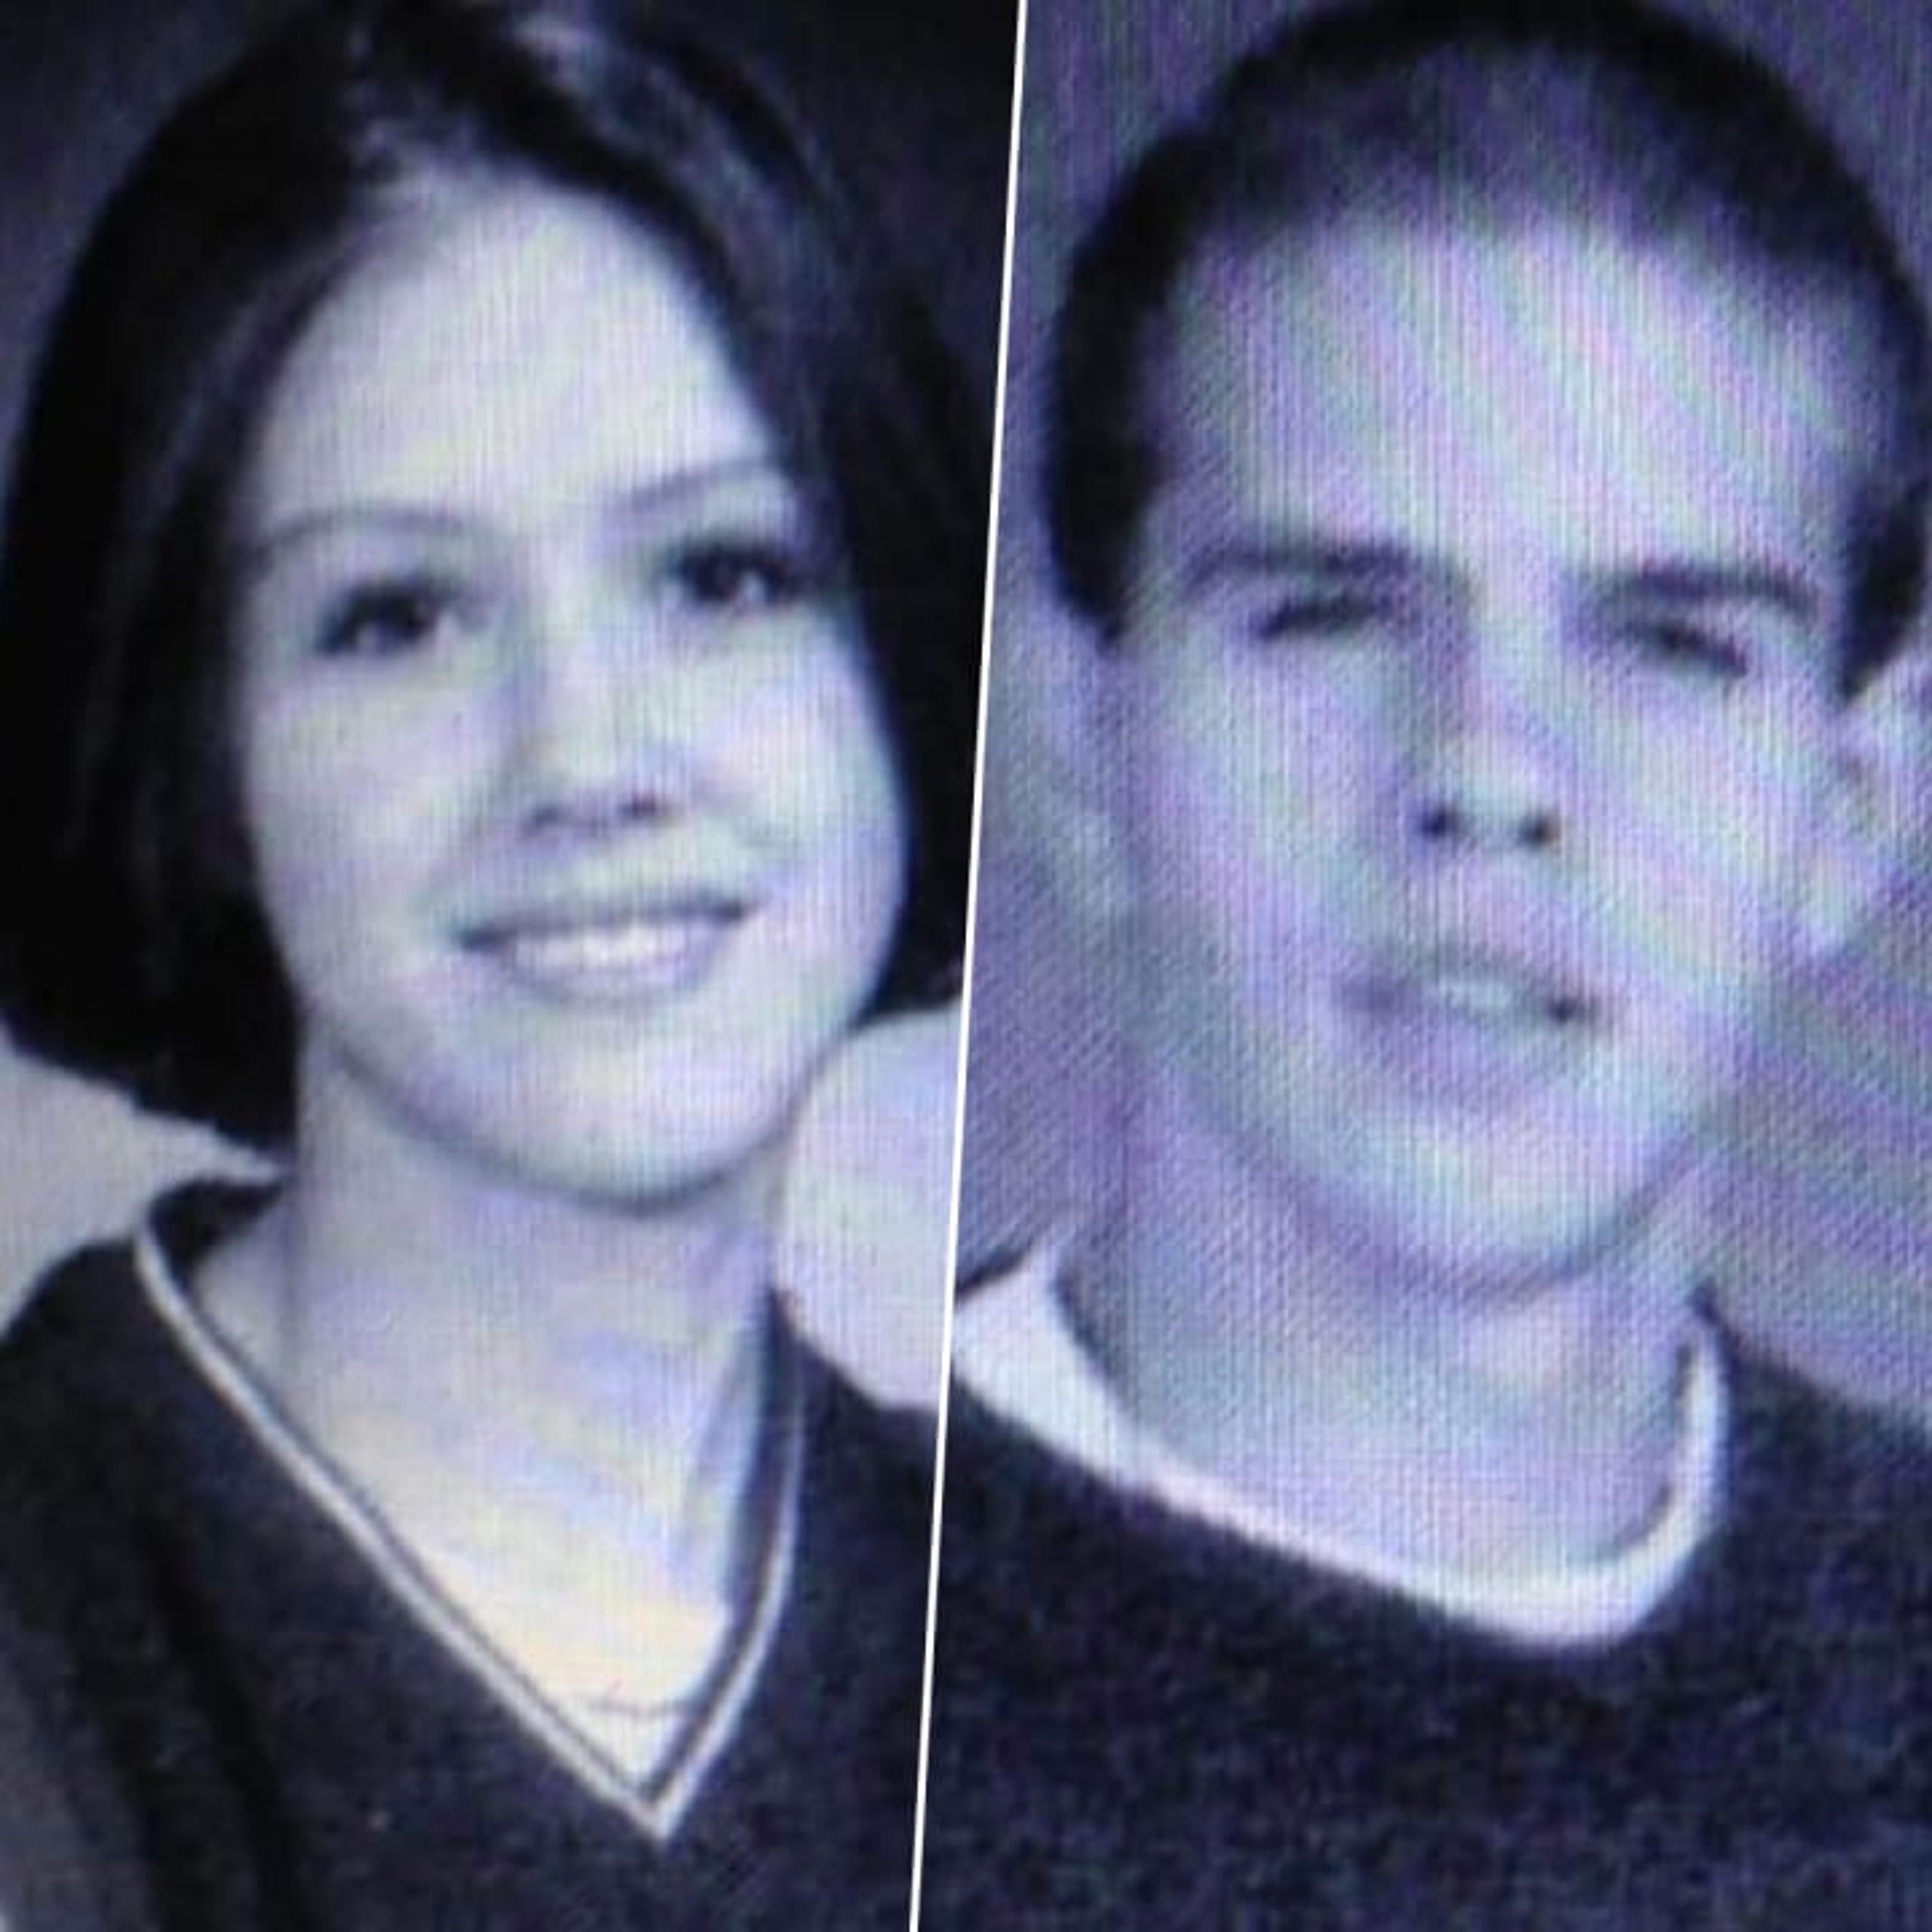 Erin Foster and Jeremy Bechtel went missing in 2000 after leaving Foster's home.